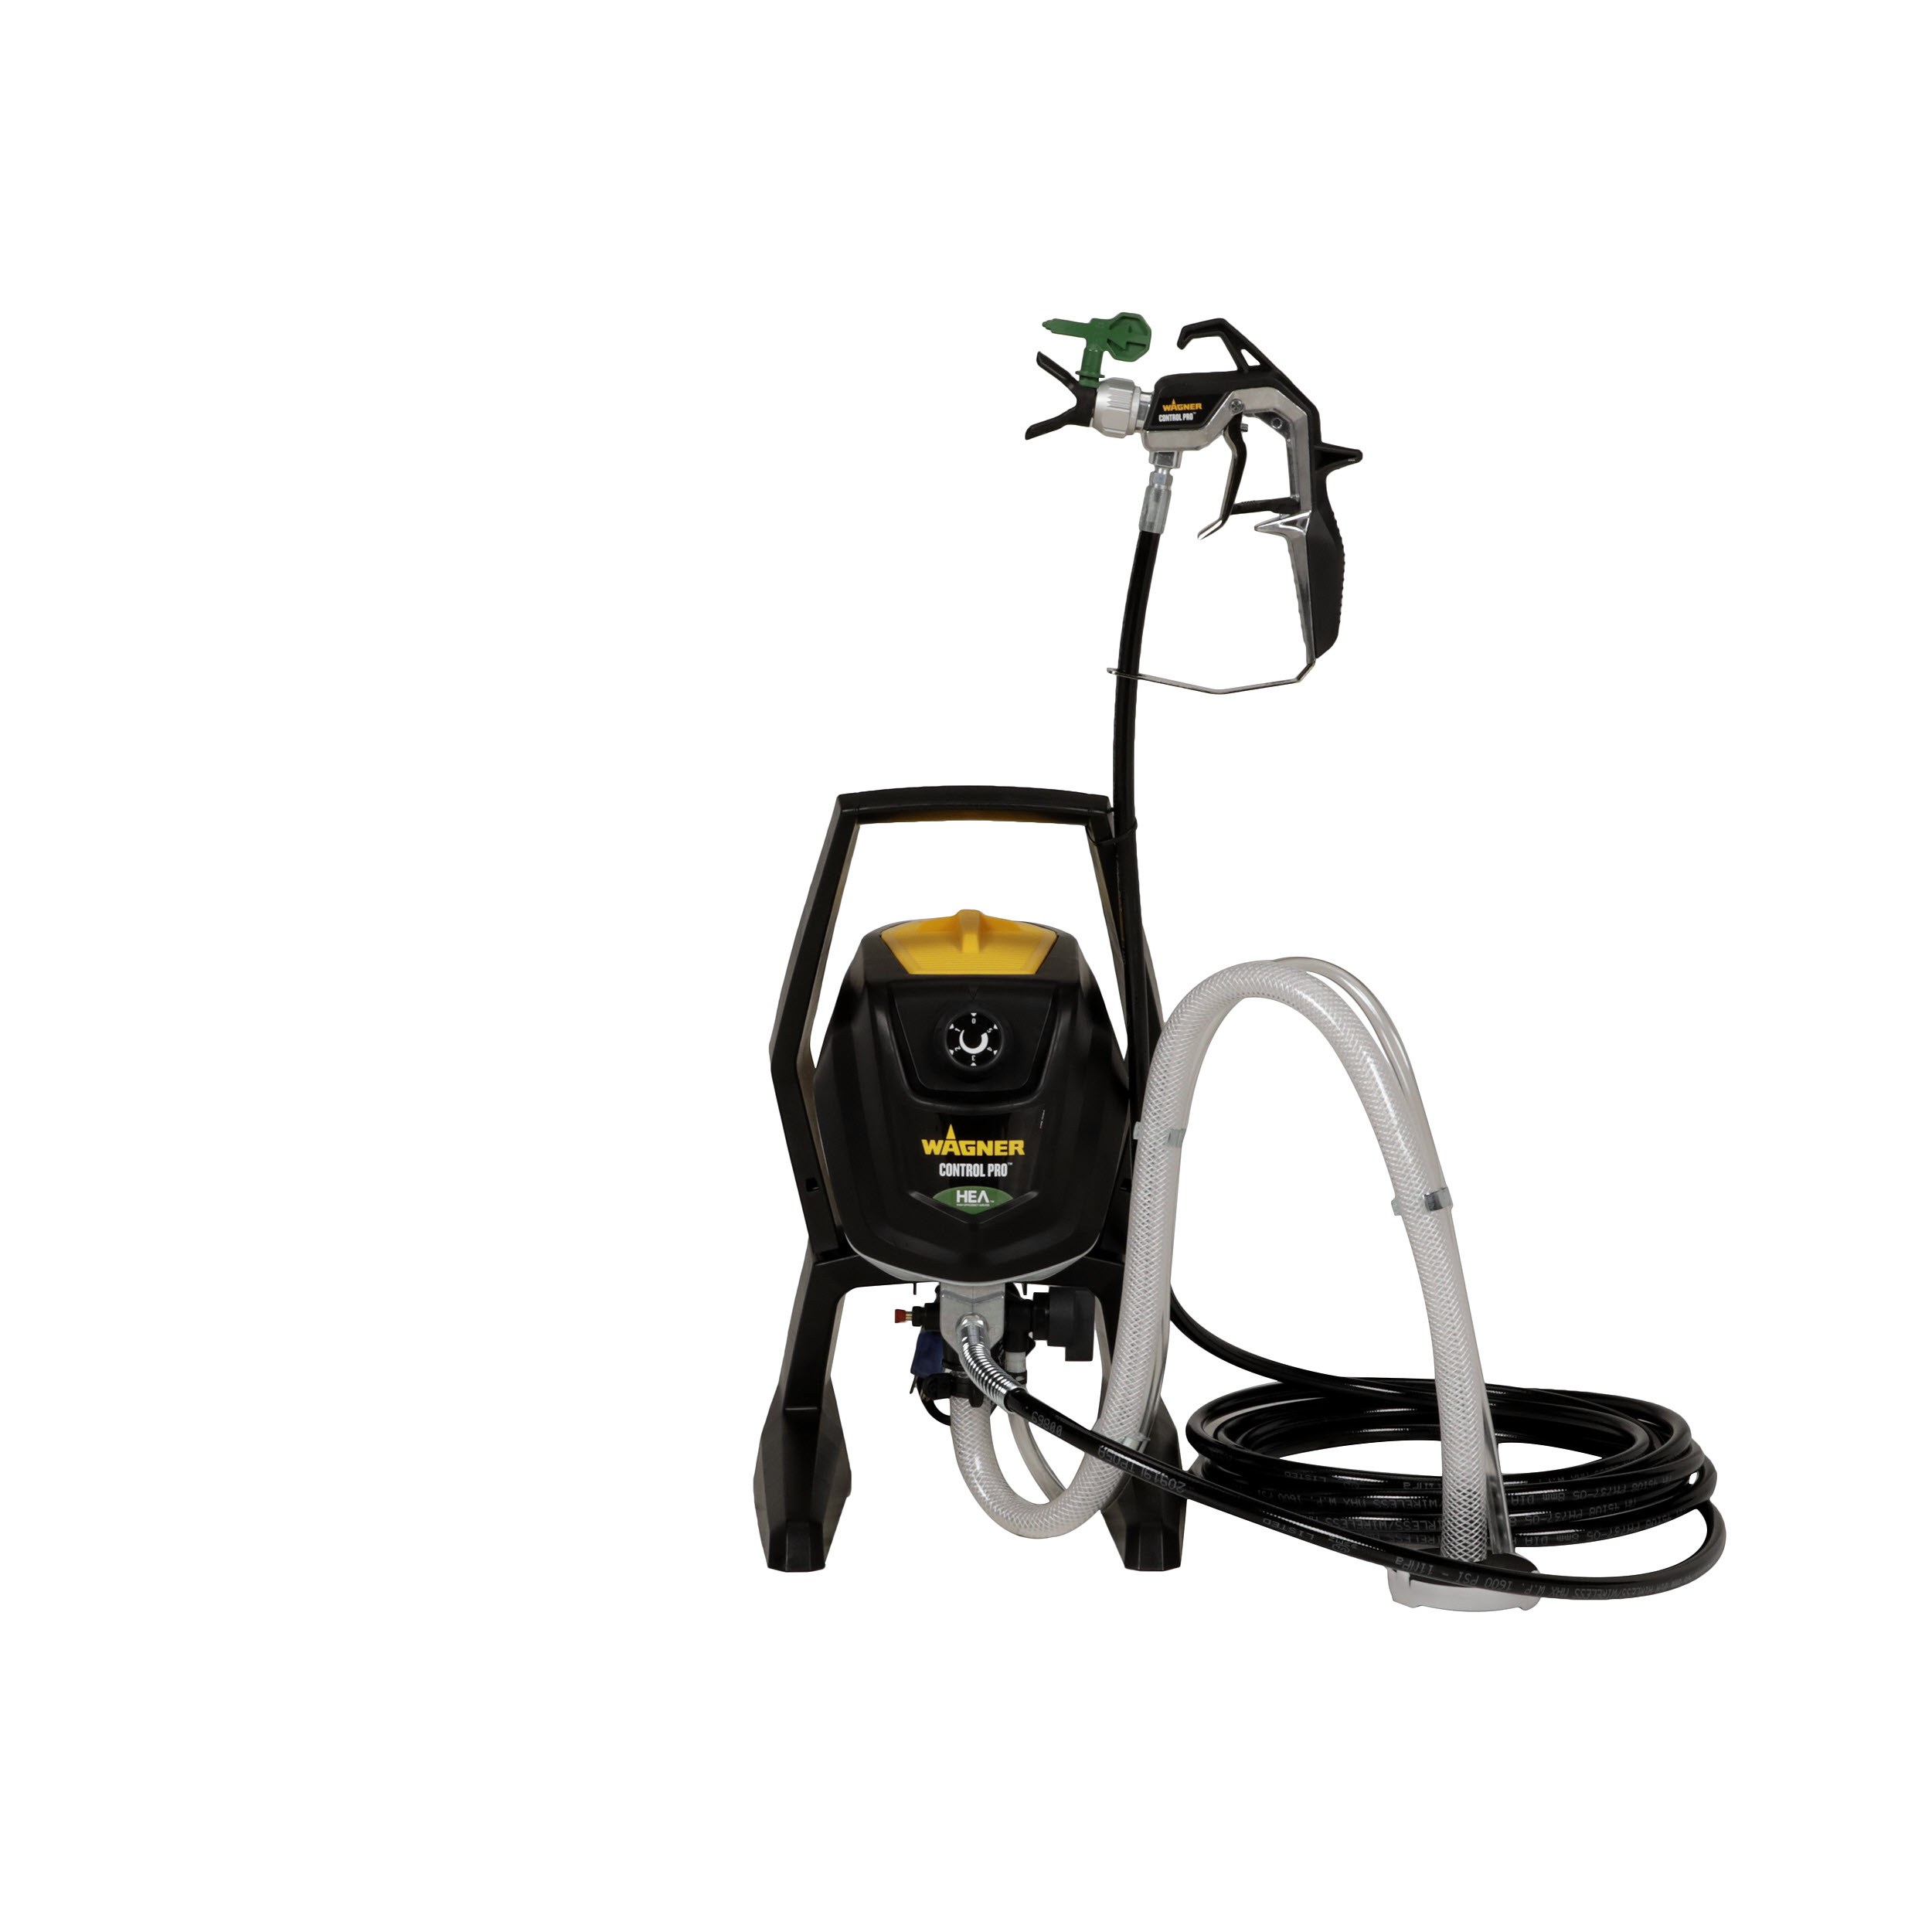 Airless Paint Low 150 High Sprayer, Pro Control Wagner with Efficiency Overspray